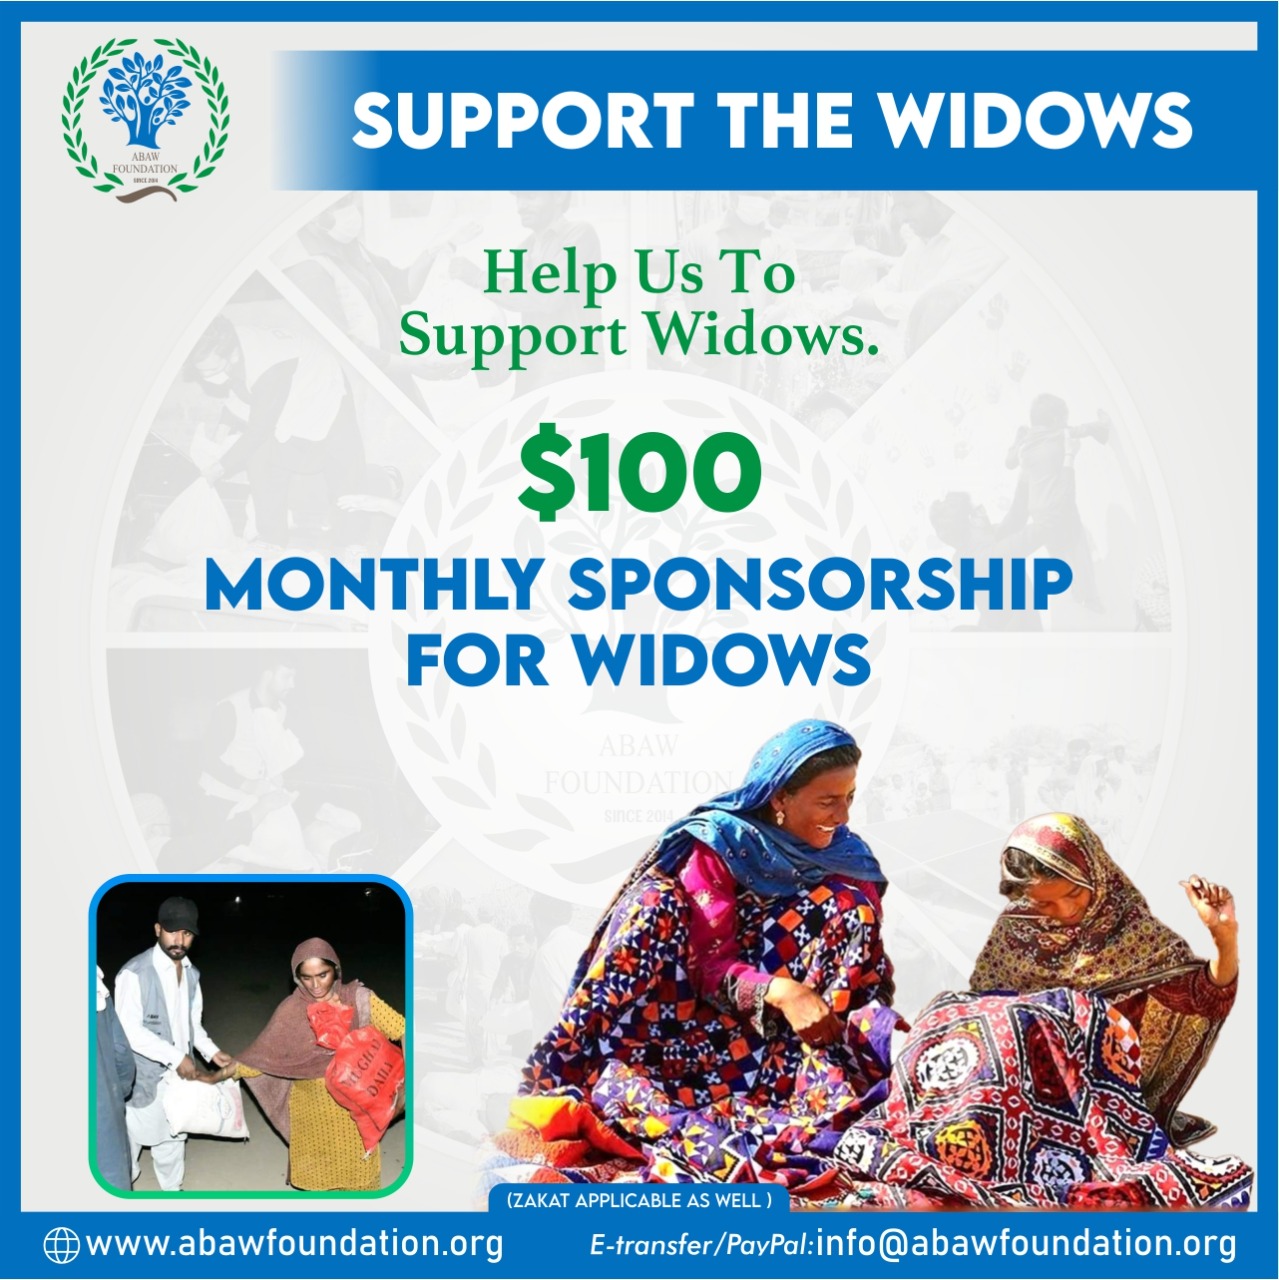 Support the Widows